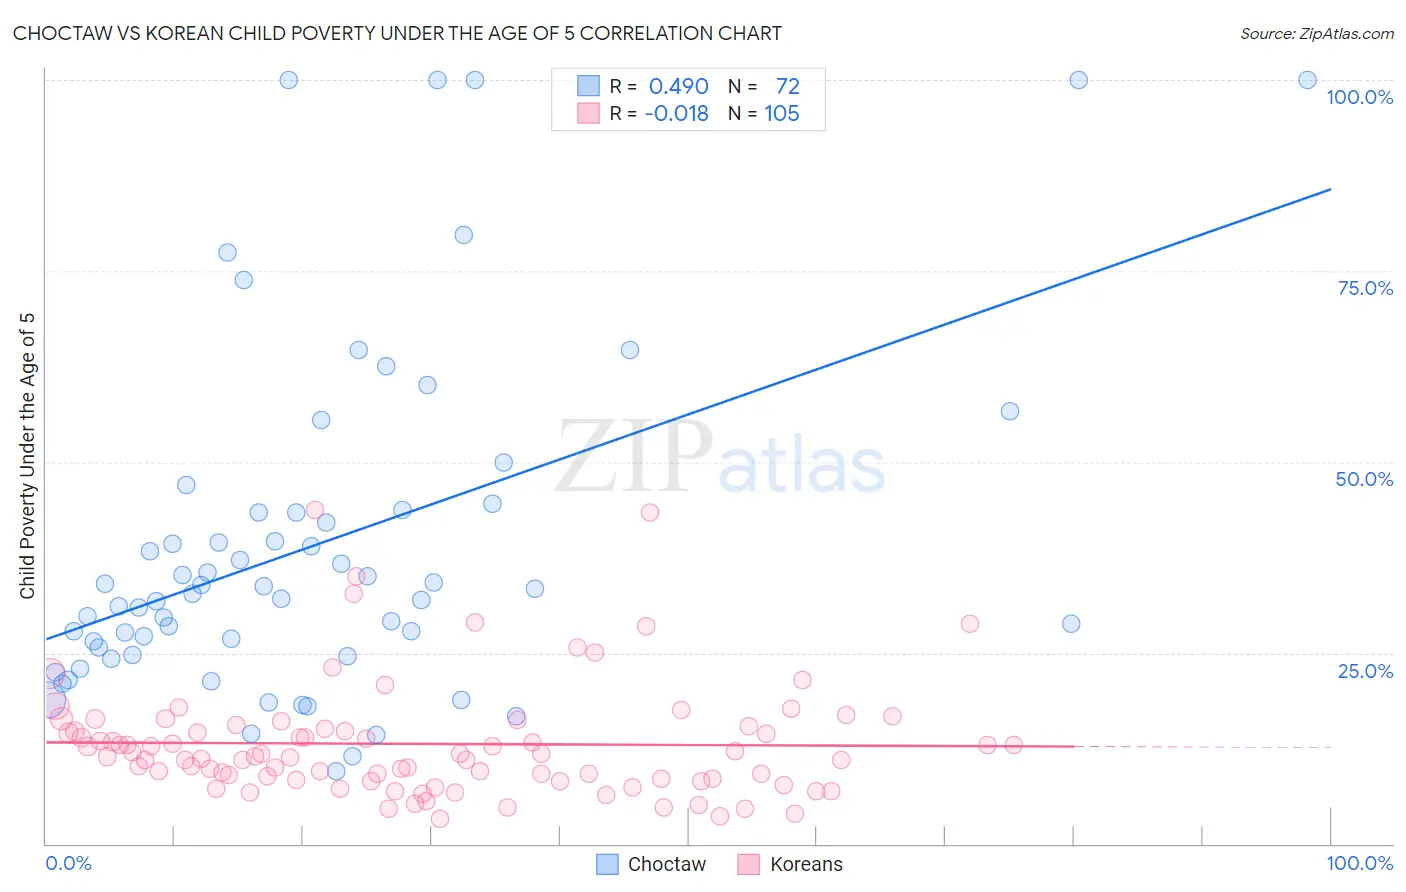 Choctaw vs Korean Child Poverty Under the Age of 5